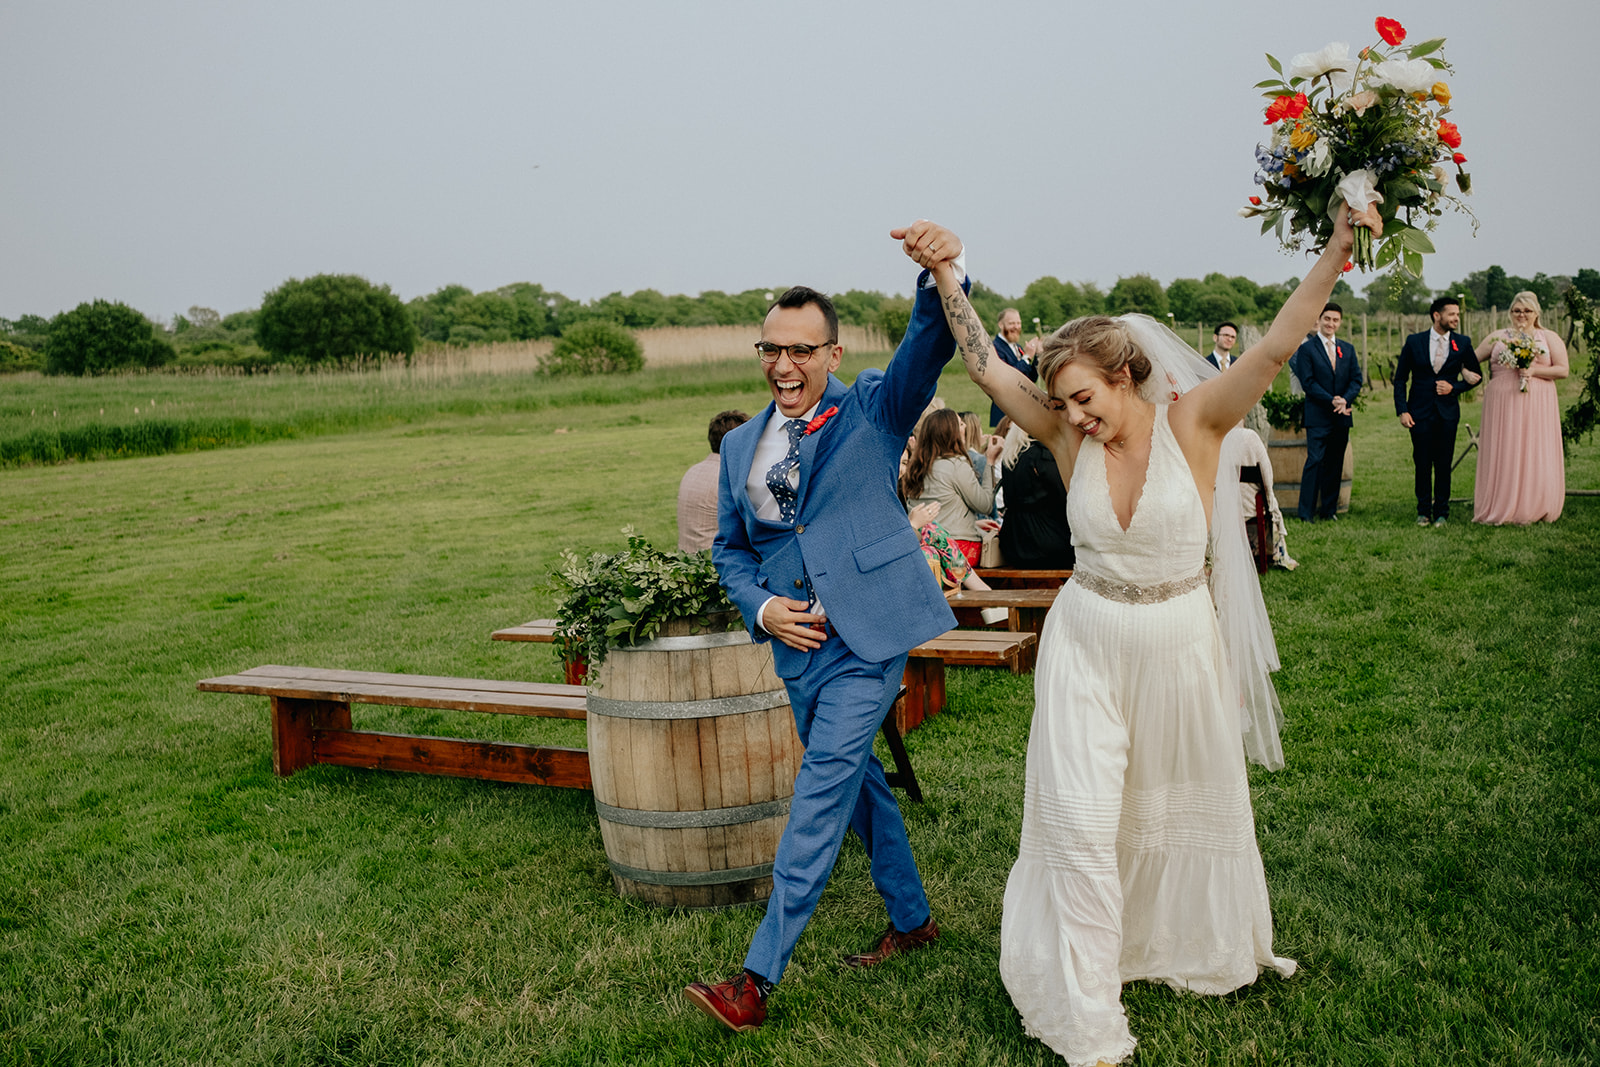 Bride and Groom Cheer as they walk down the aisle together in Newport Vineyards Wedding | A Photographer's Guide to Your Wedding Day Timeline